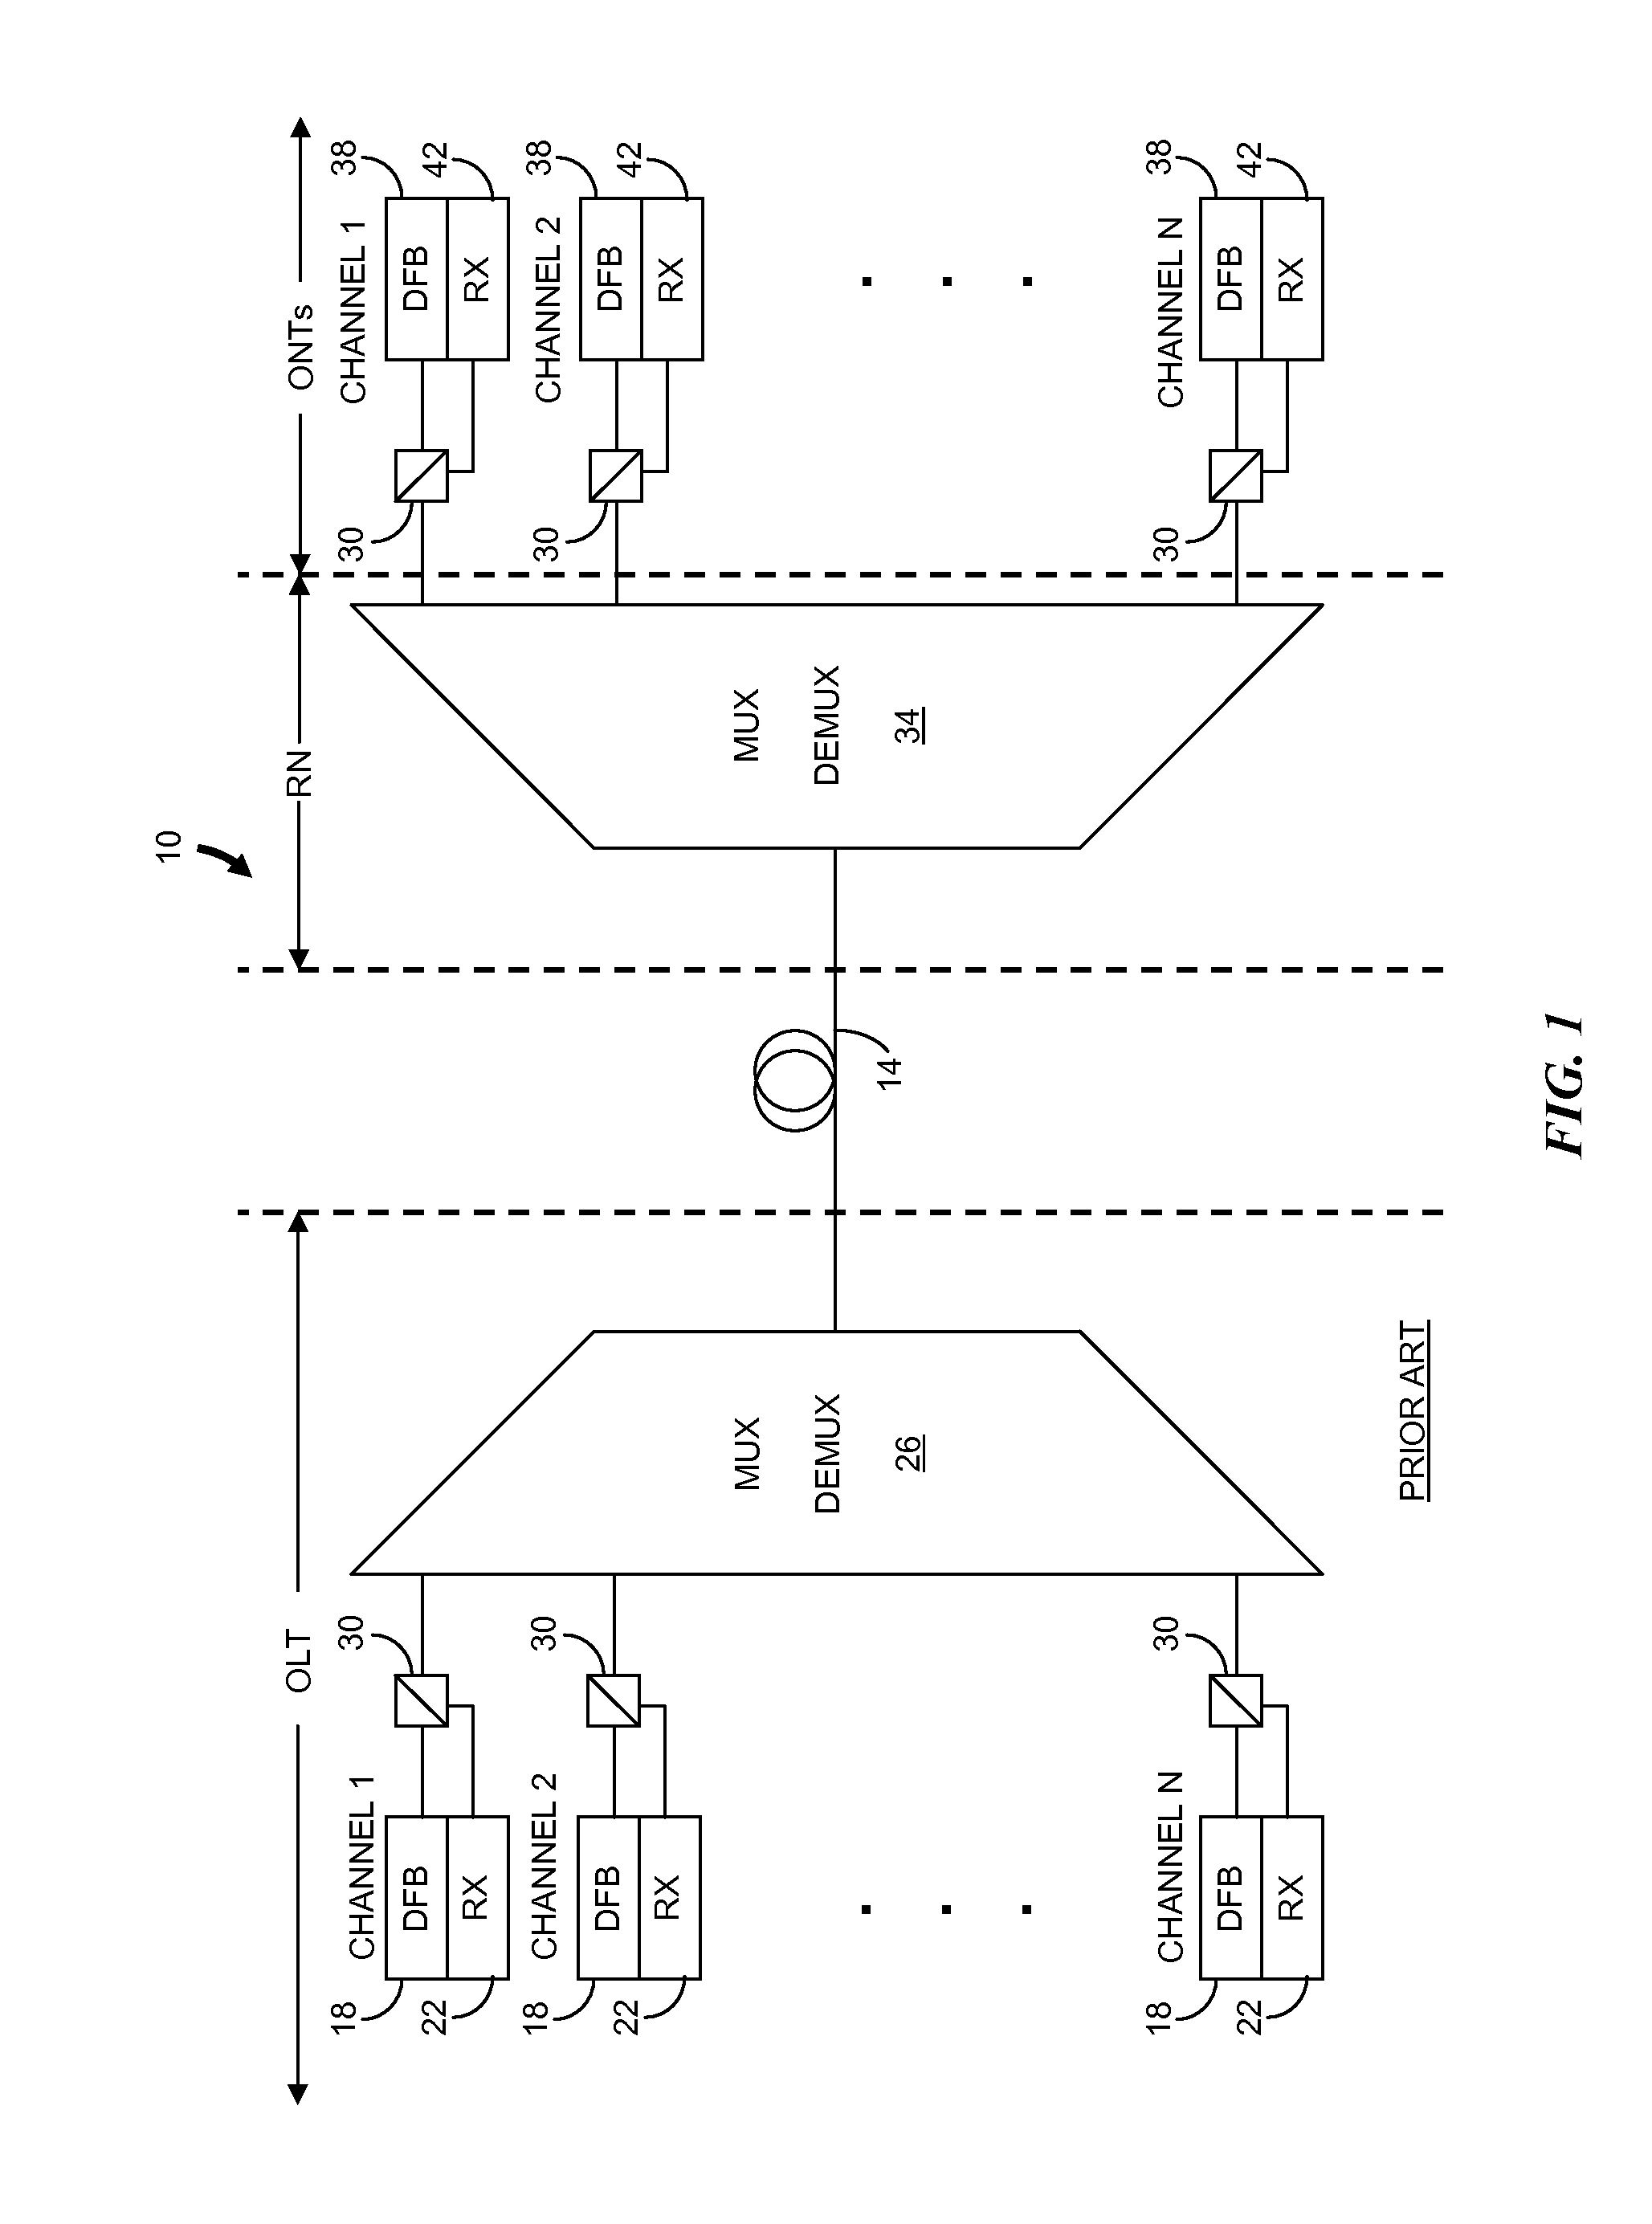 Method of Wavelength Alignment for a Wavelength Division Multiplexed Passive Optical Network